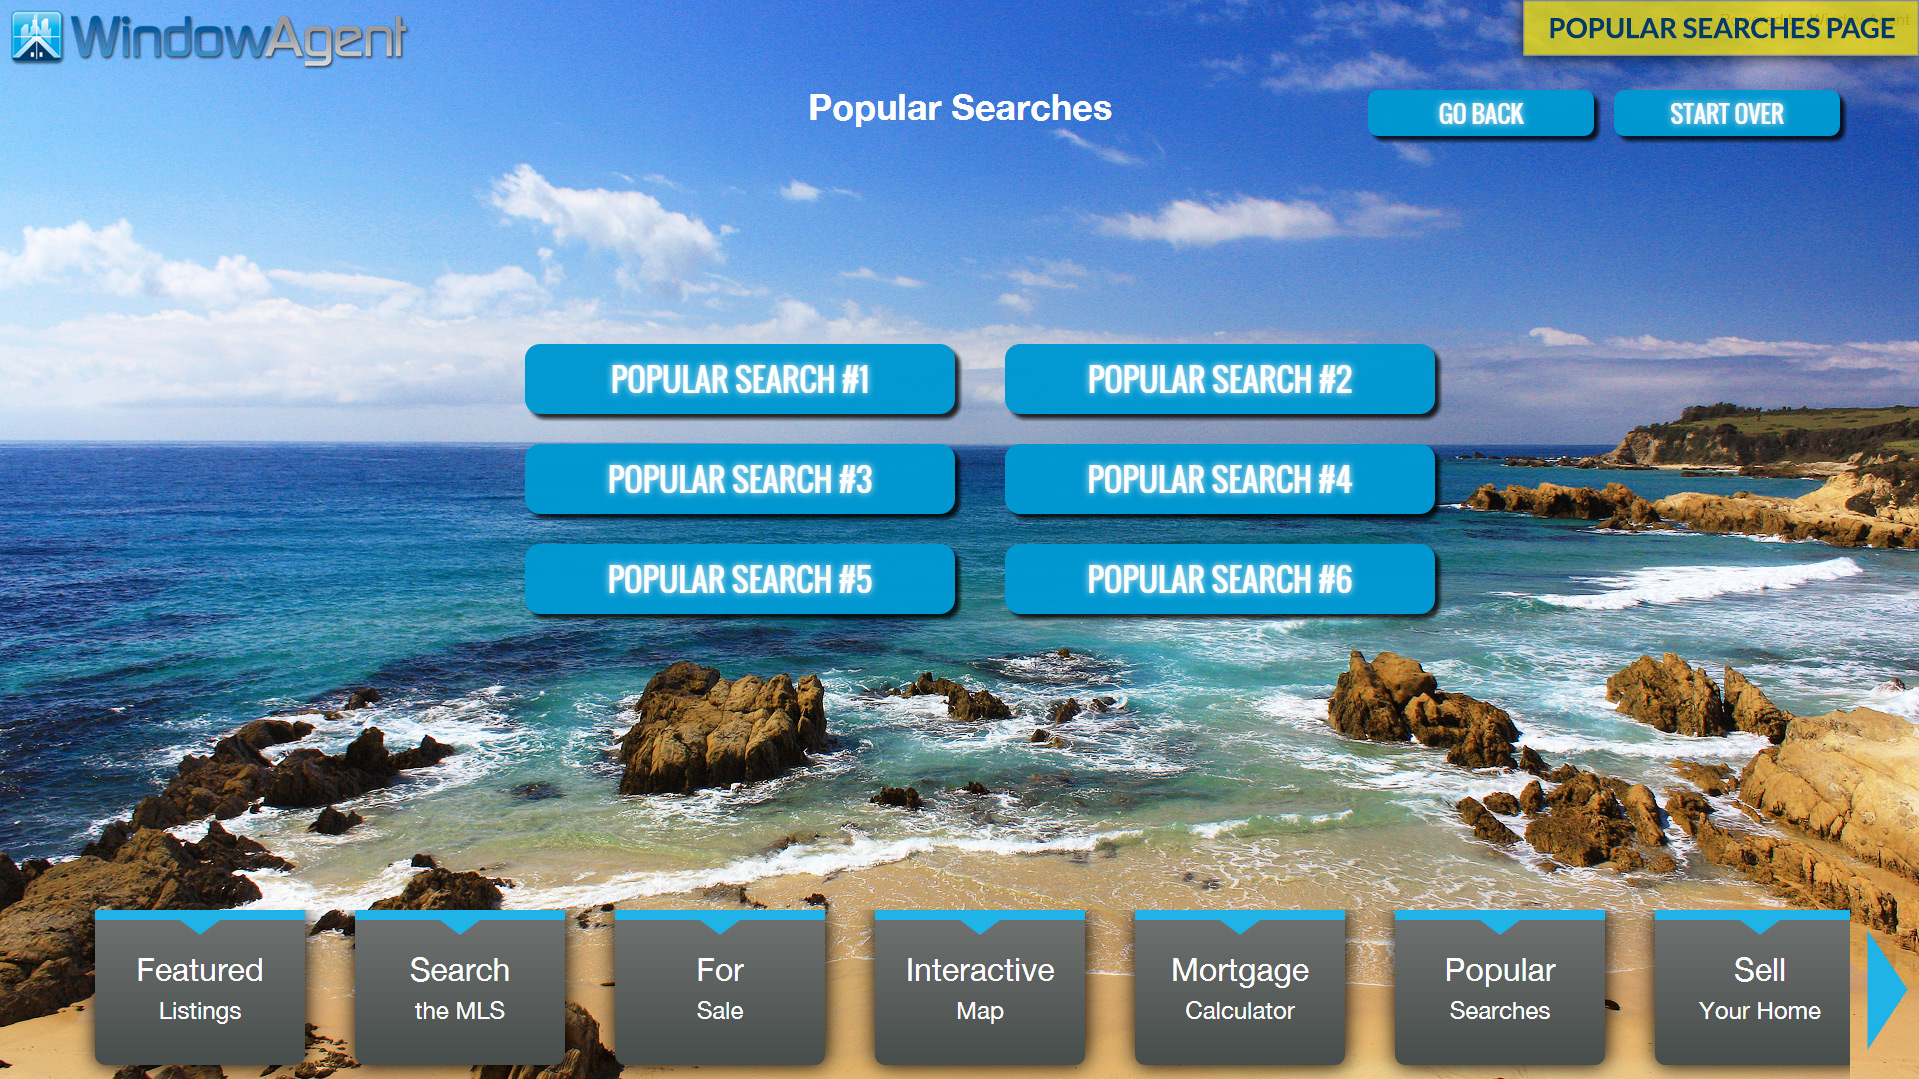 Windowagent real estate software app design popular searches page